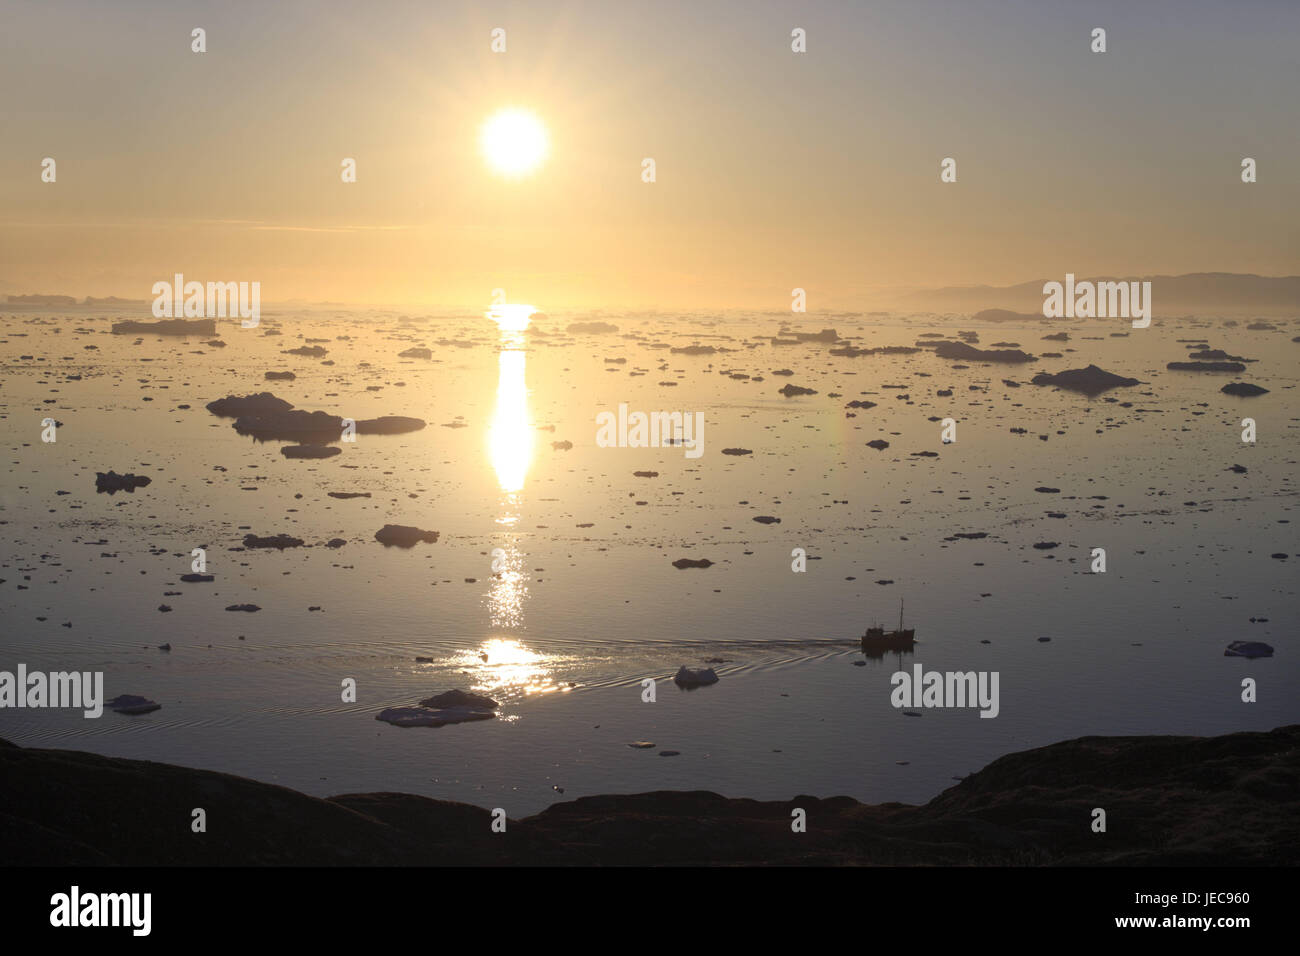 Greenland, Disco Bay, Ilulissat, fjord, drift ice, view, midnight sun, back light, Western Greenland, ice, glacier, glacier ice, the Arctic, summer, loneliness, deserted, glacier abnormal termination, nature, climate change, mirroring, water surface, coast, boat, the sun, Stock Photo